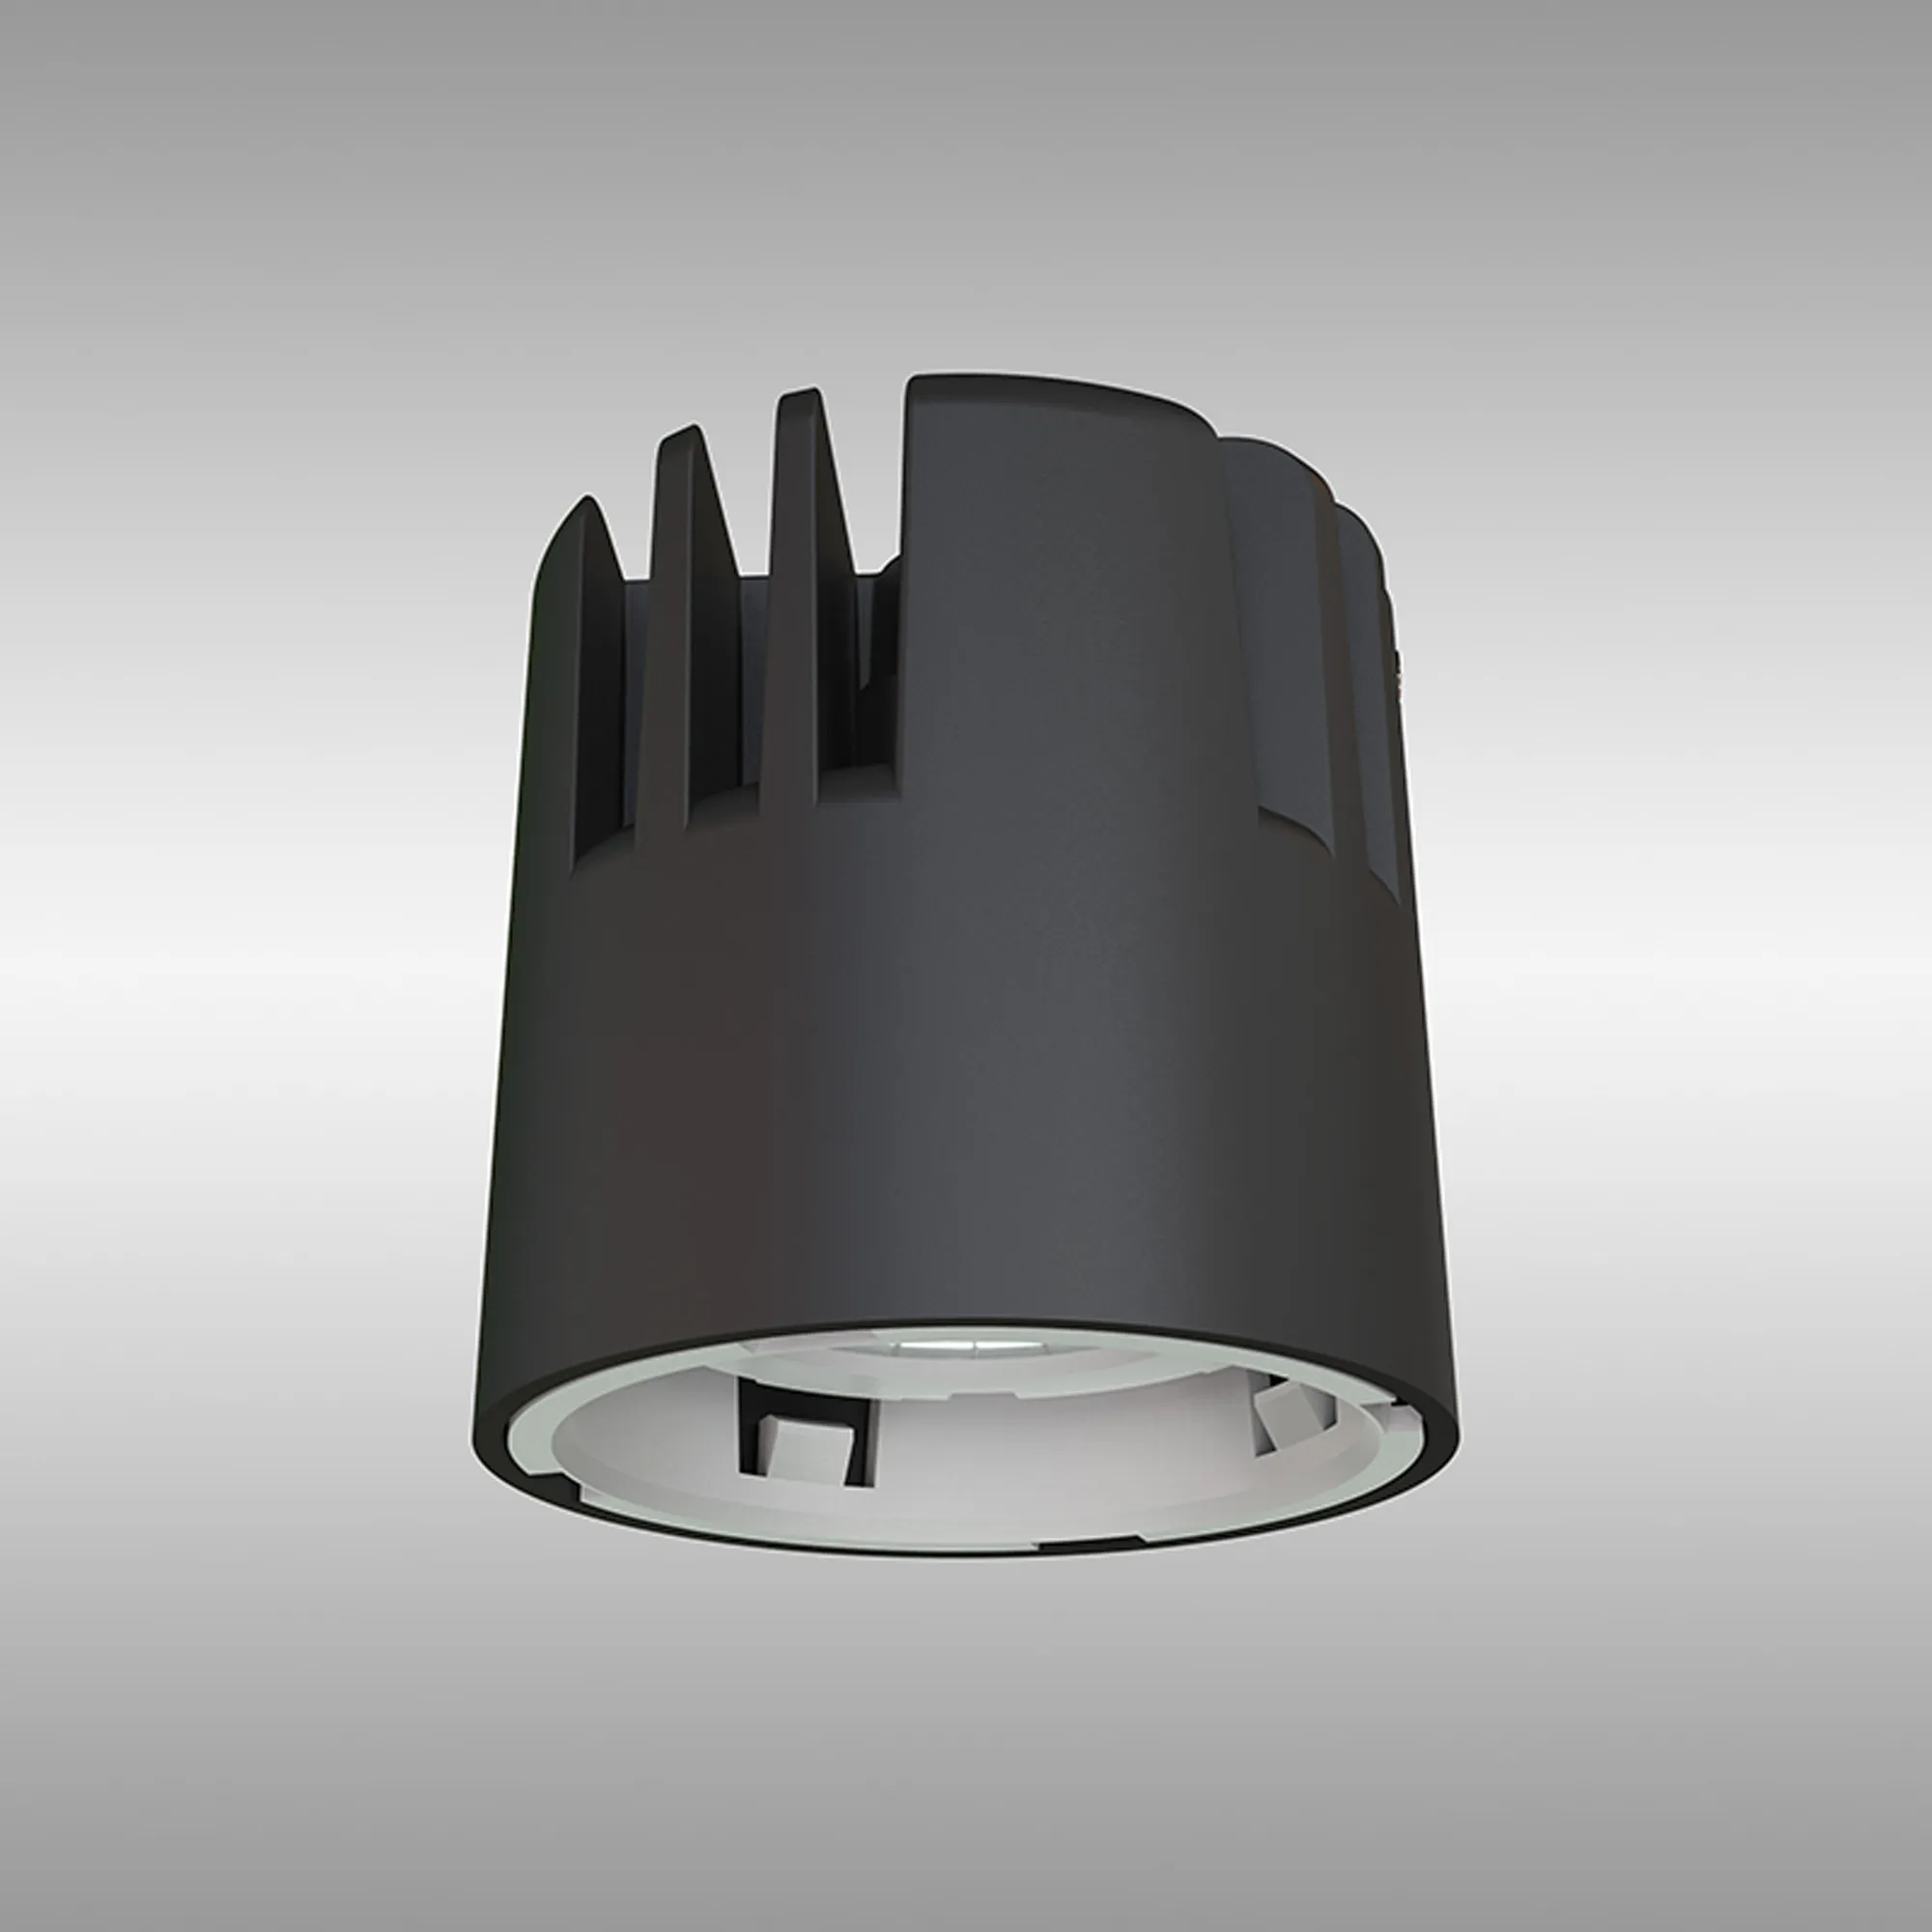 M8773  Sunset; 6W; 150mA; Black LED Engine; 4000K; 560lm; 50° Deg; IP20; DRIVER NOT INC.; Recessed Base Required; 5yrs Warranty